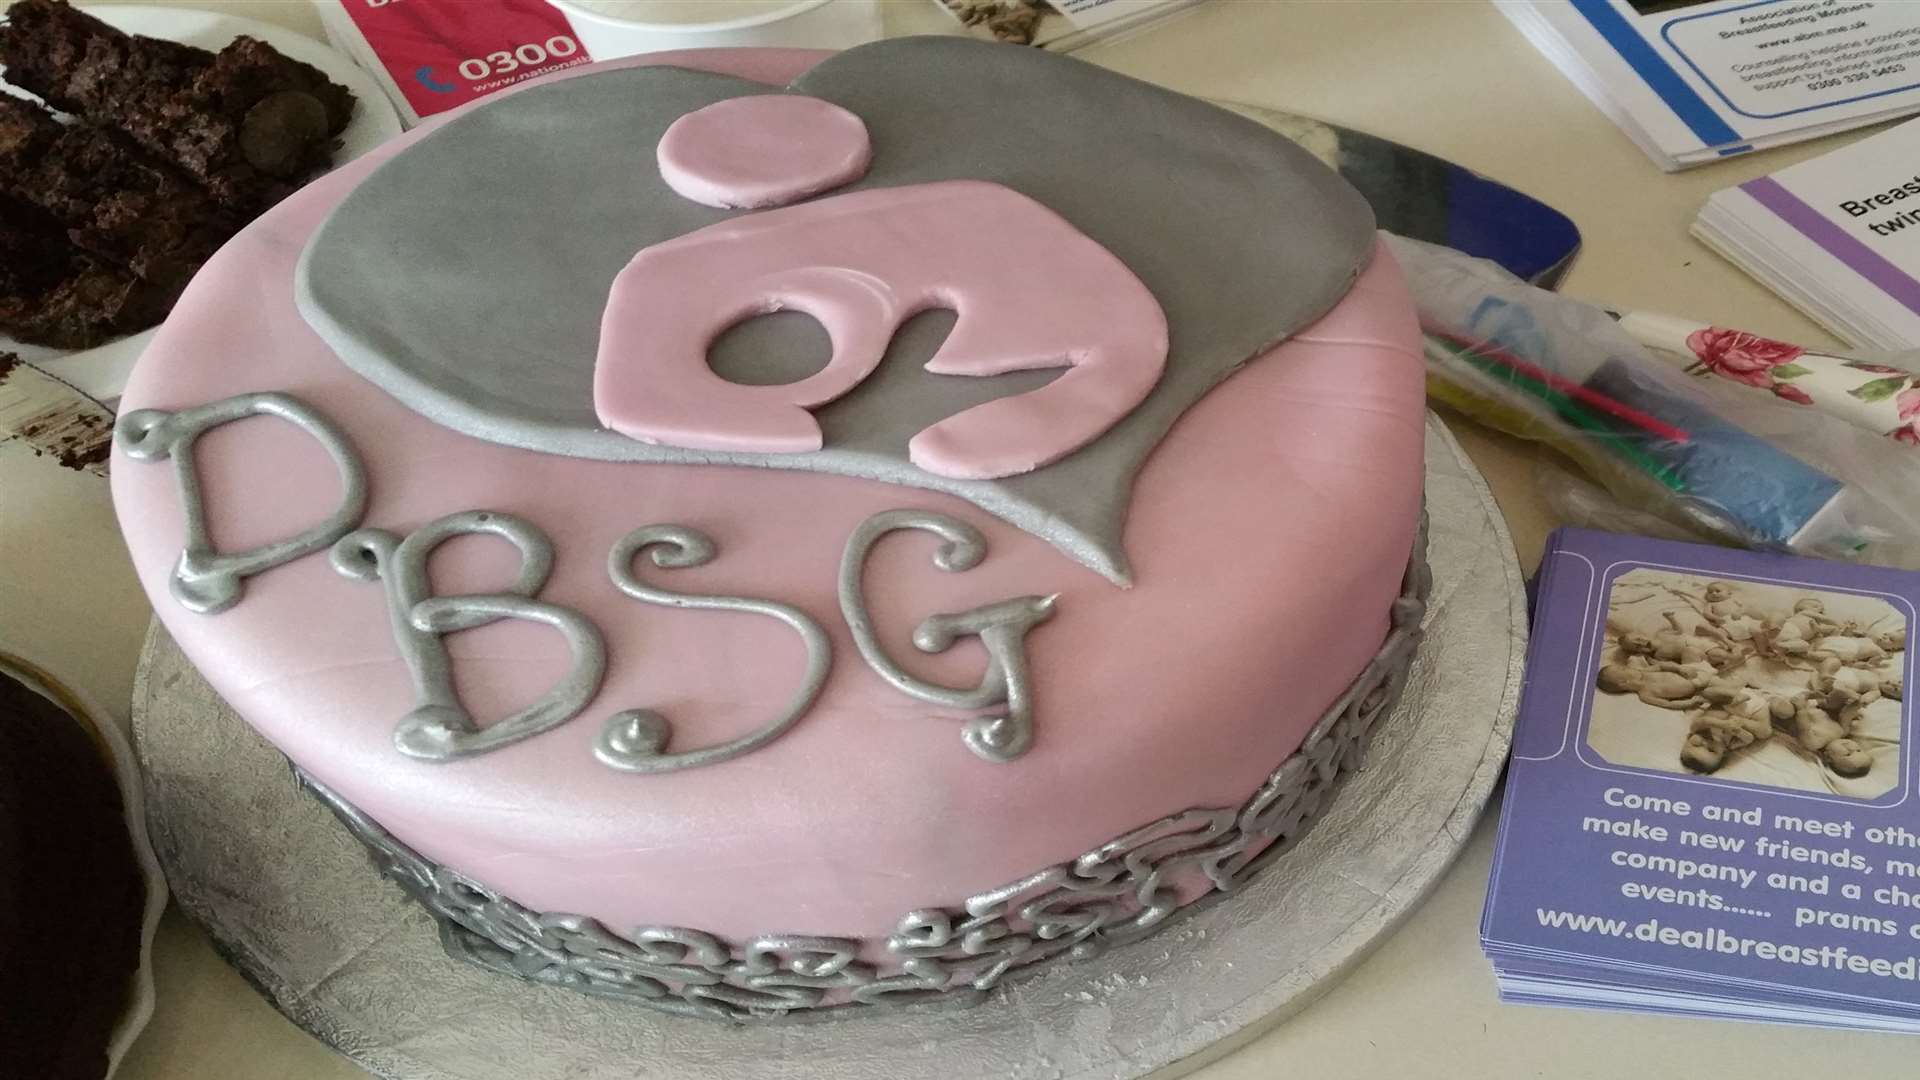 The cake, made by Laura Newing, marked the fourth birthday of Deal Breastfeeding Support Group